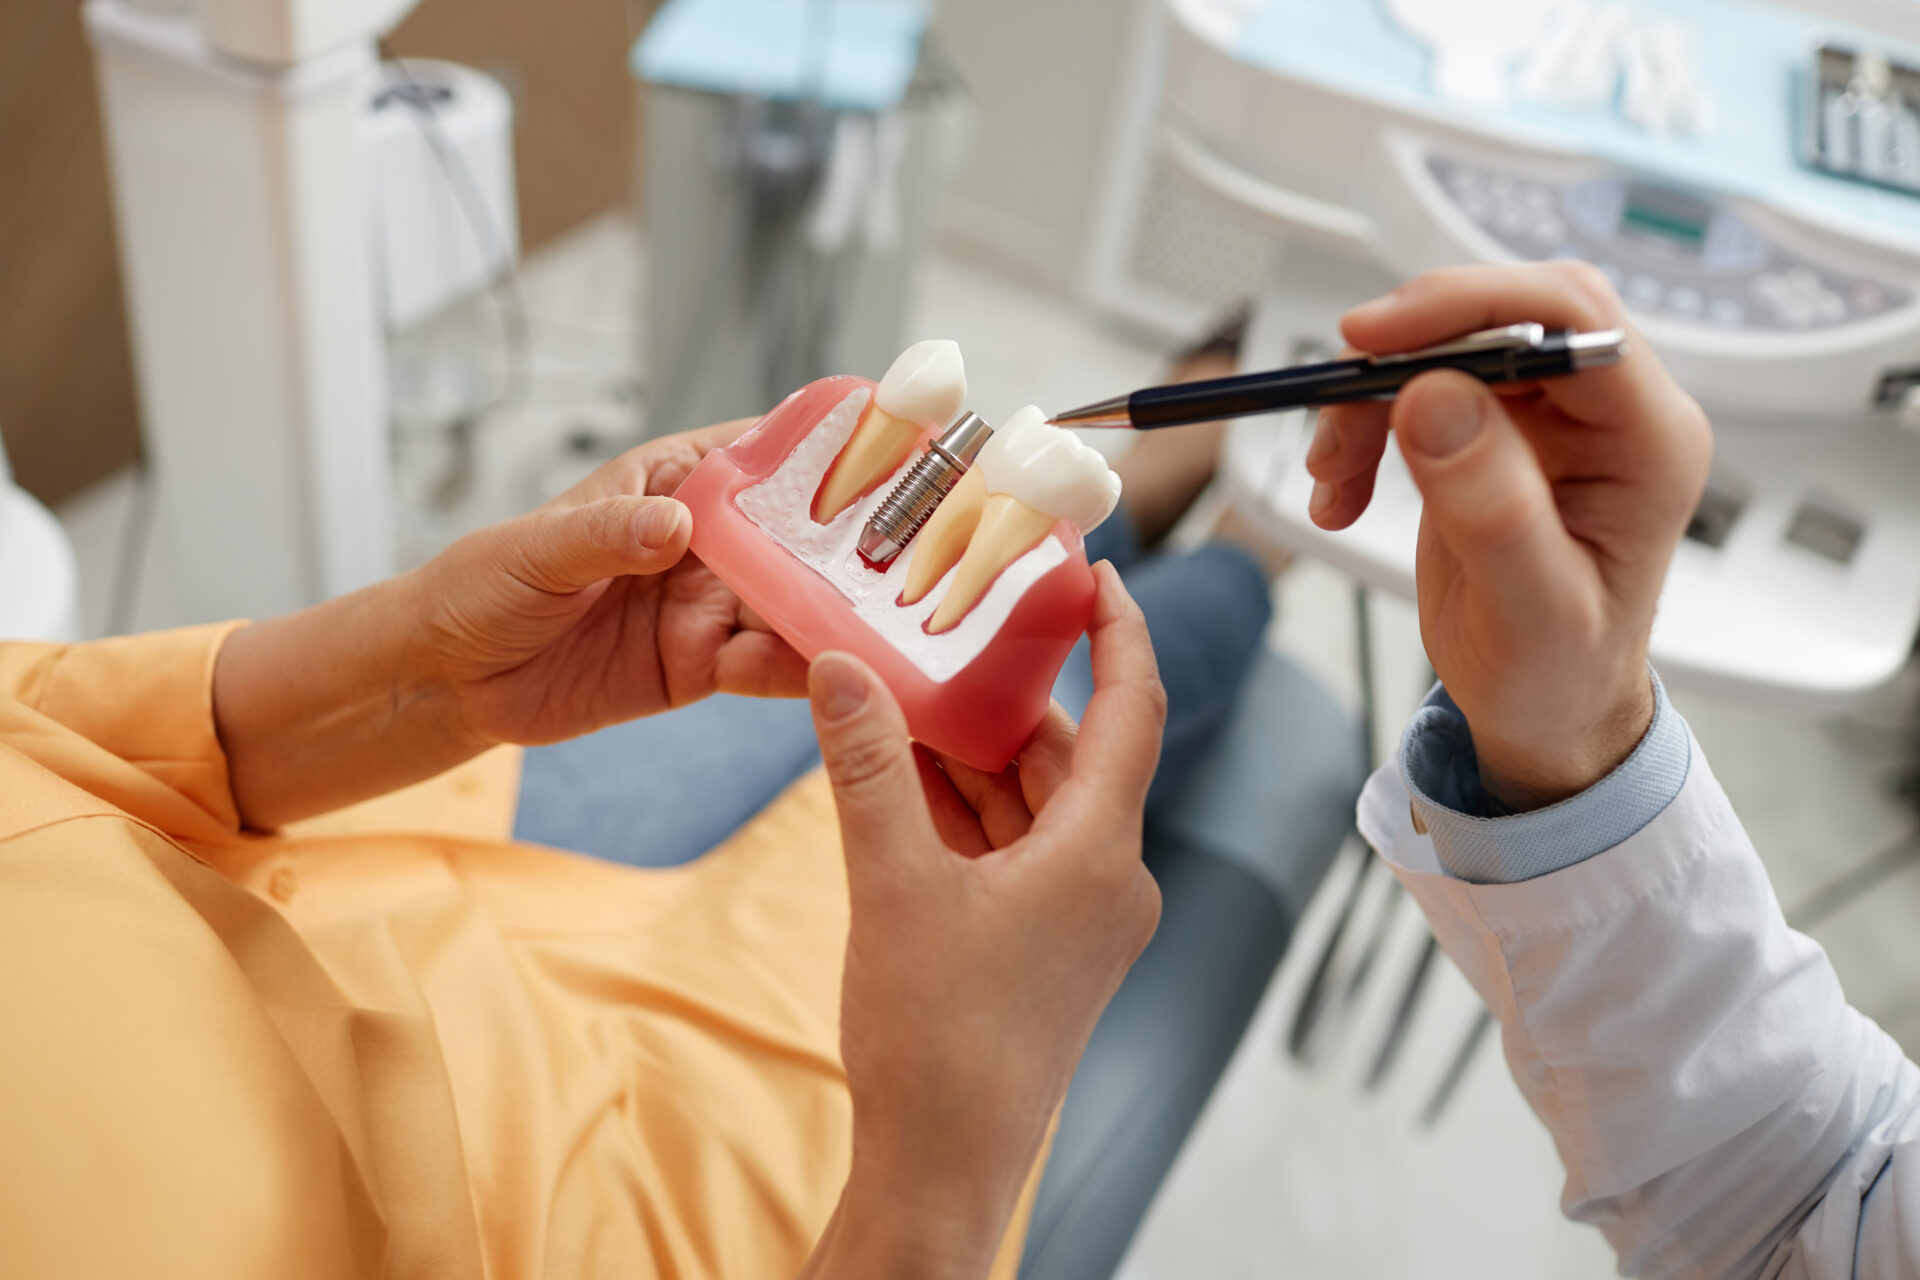 Analysis Of West Virginia Dental Care Reveals Barriers For Some